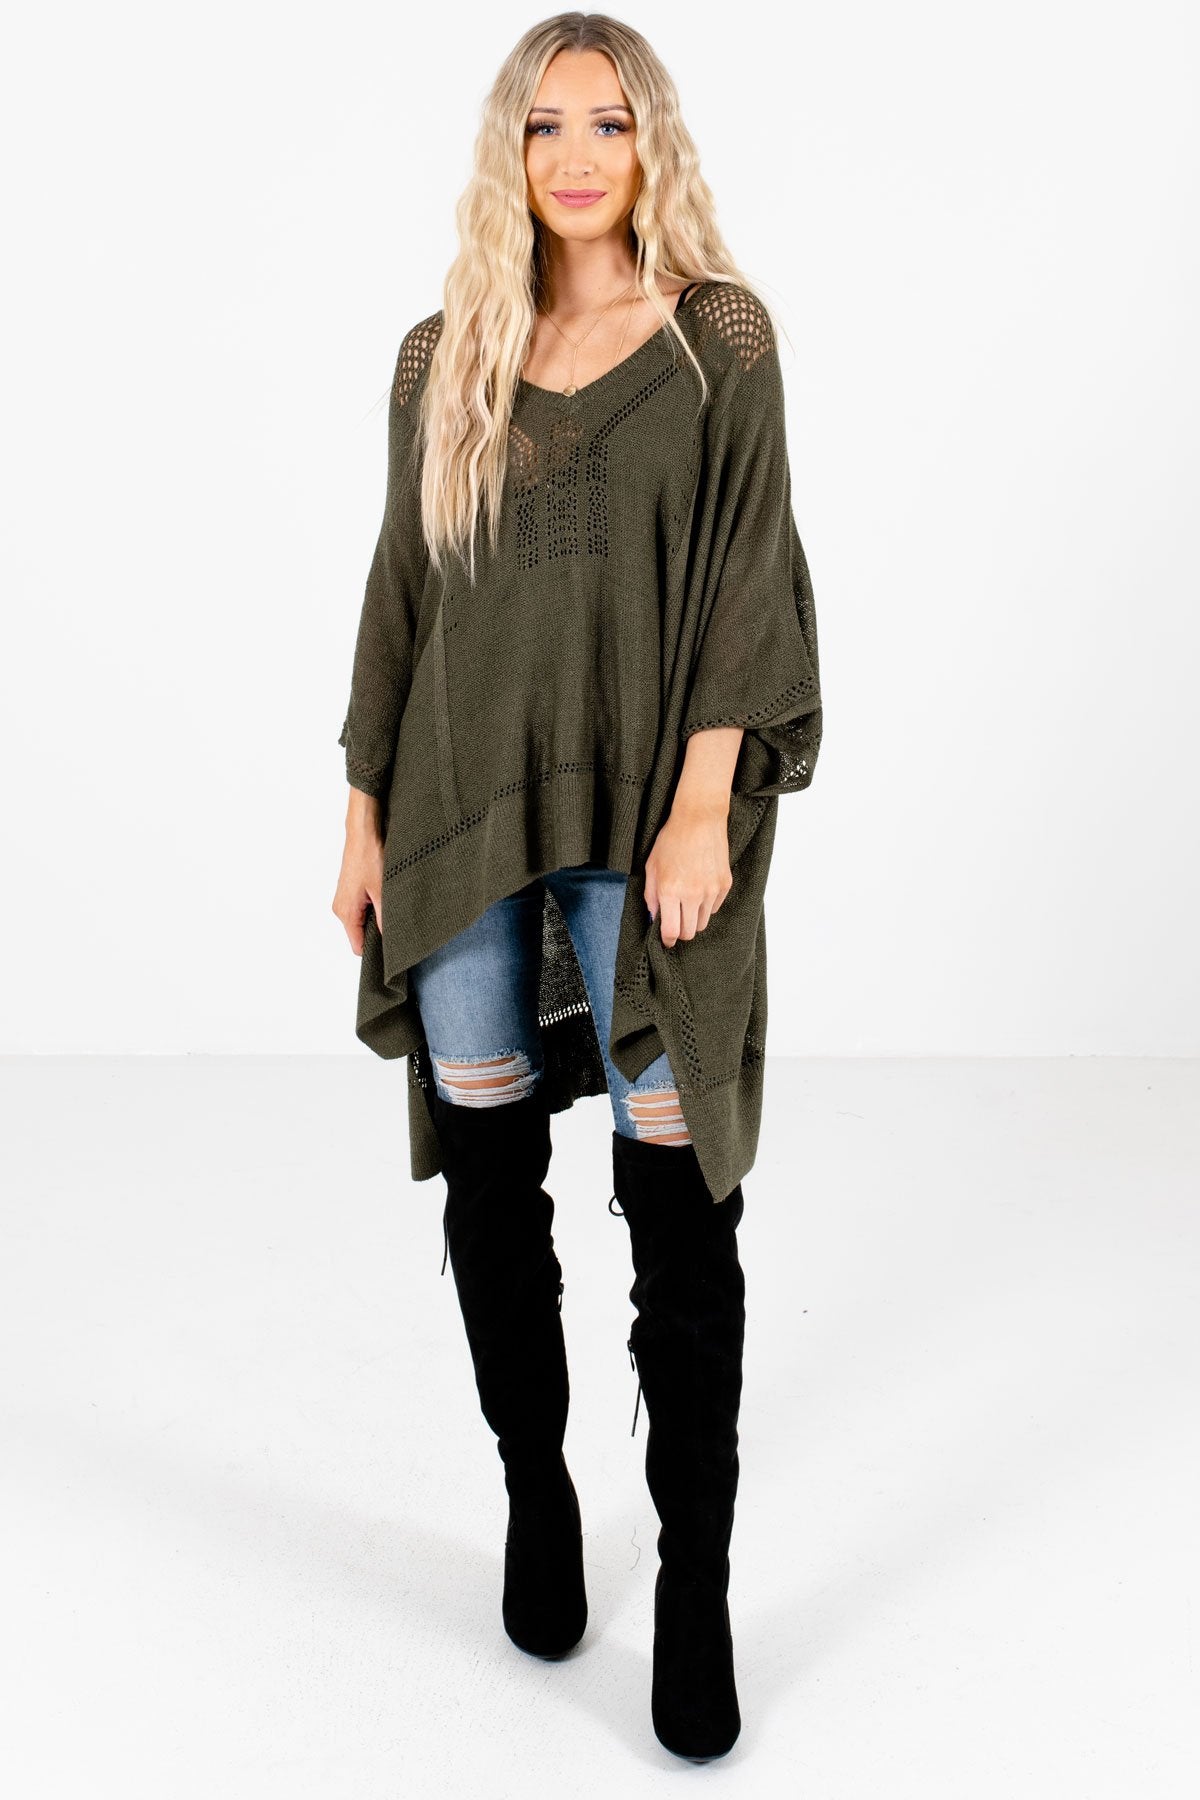 Olive Green Cute and Comfortable Boutique Ponchos for Women